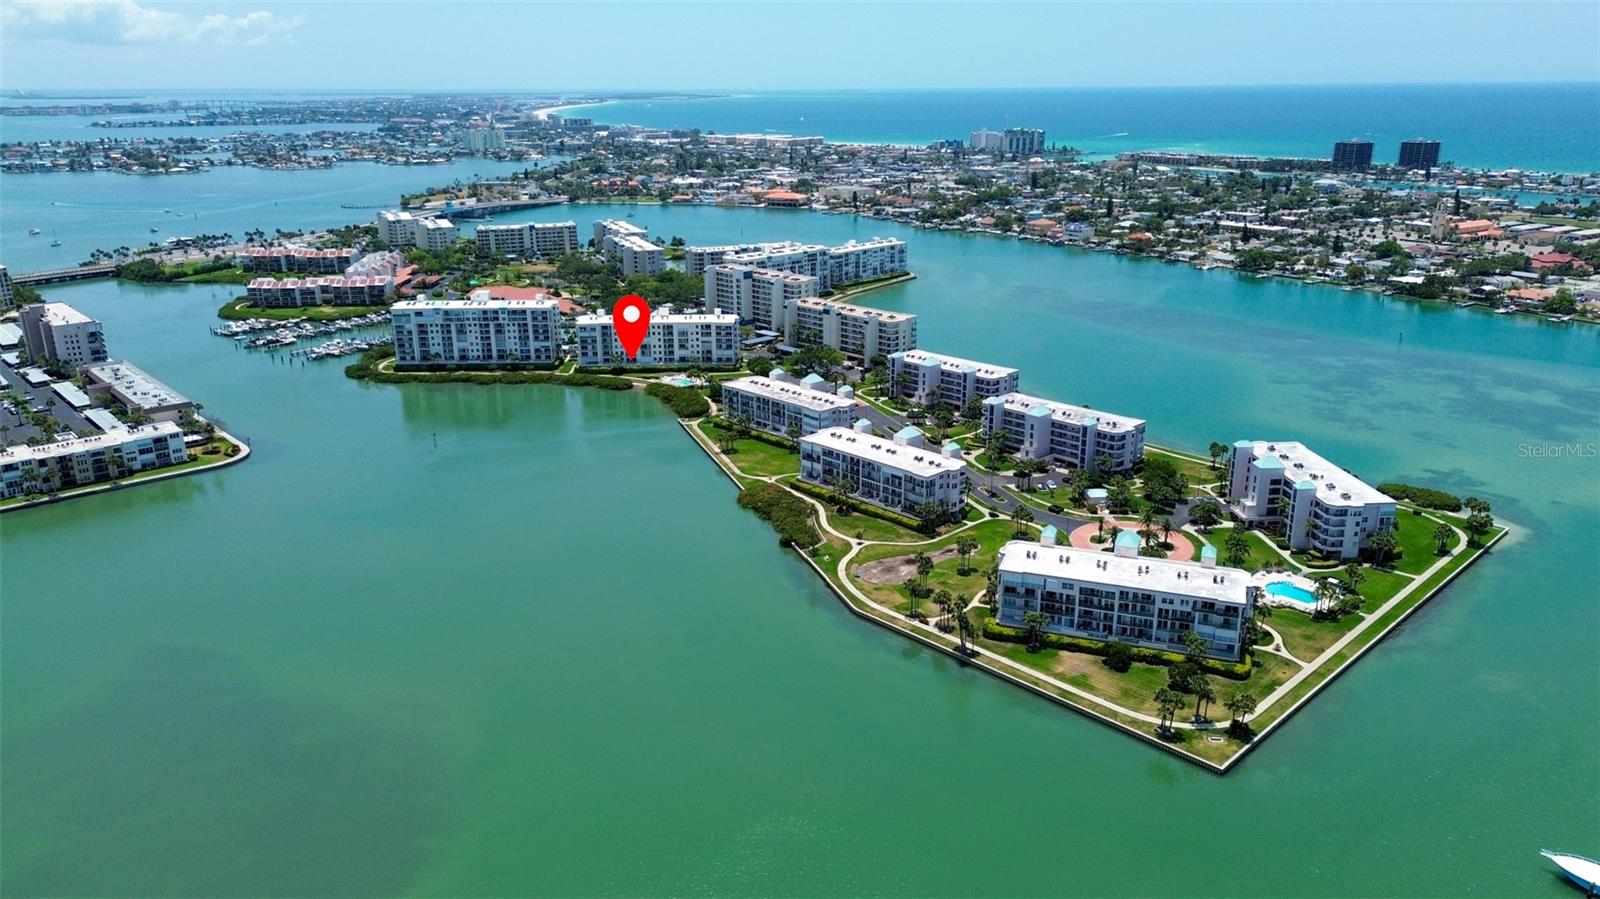 What a place to call home!  The Harbourside community is one of the best places to live!